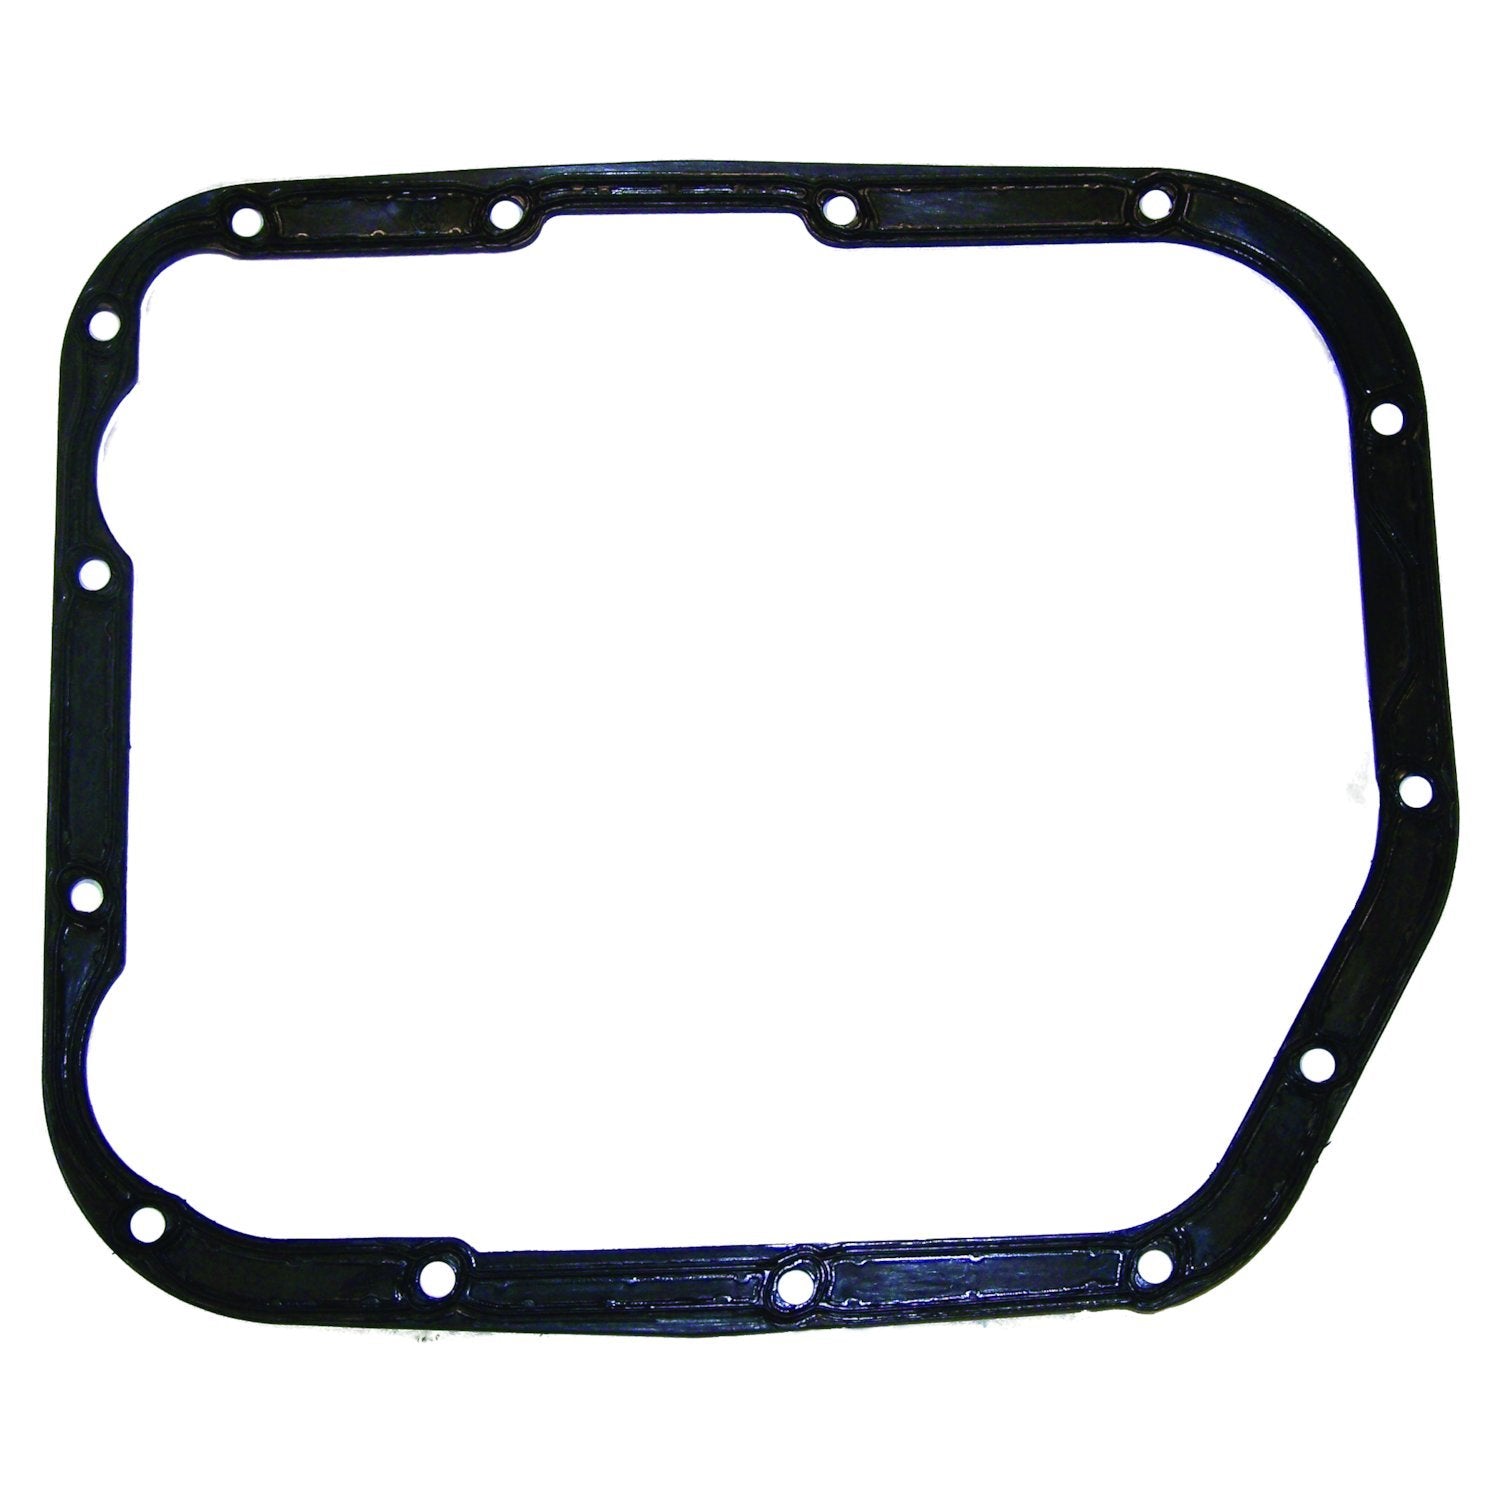 Transmission Pan Gasket for Various Jeep Vehicles